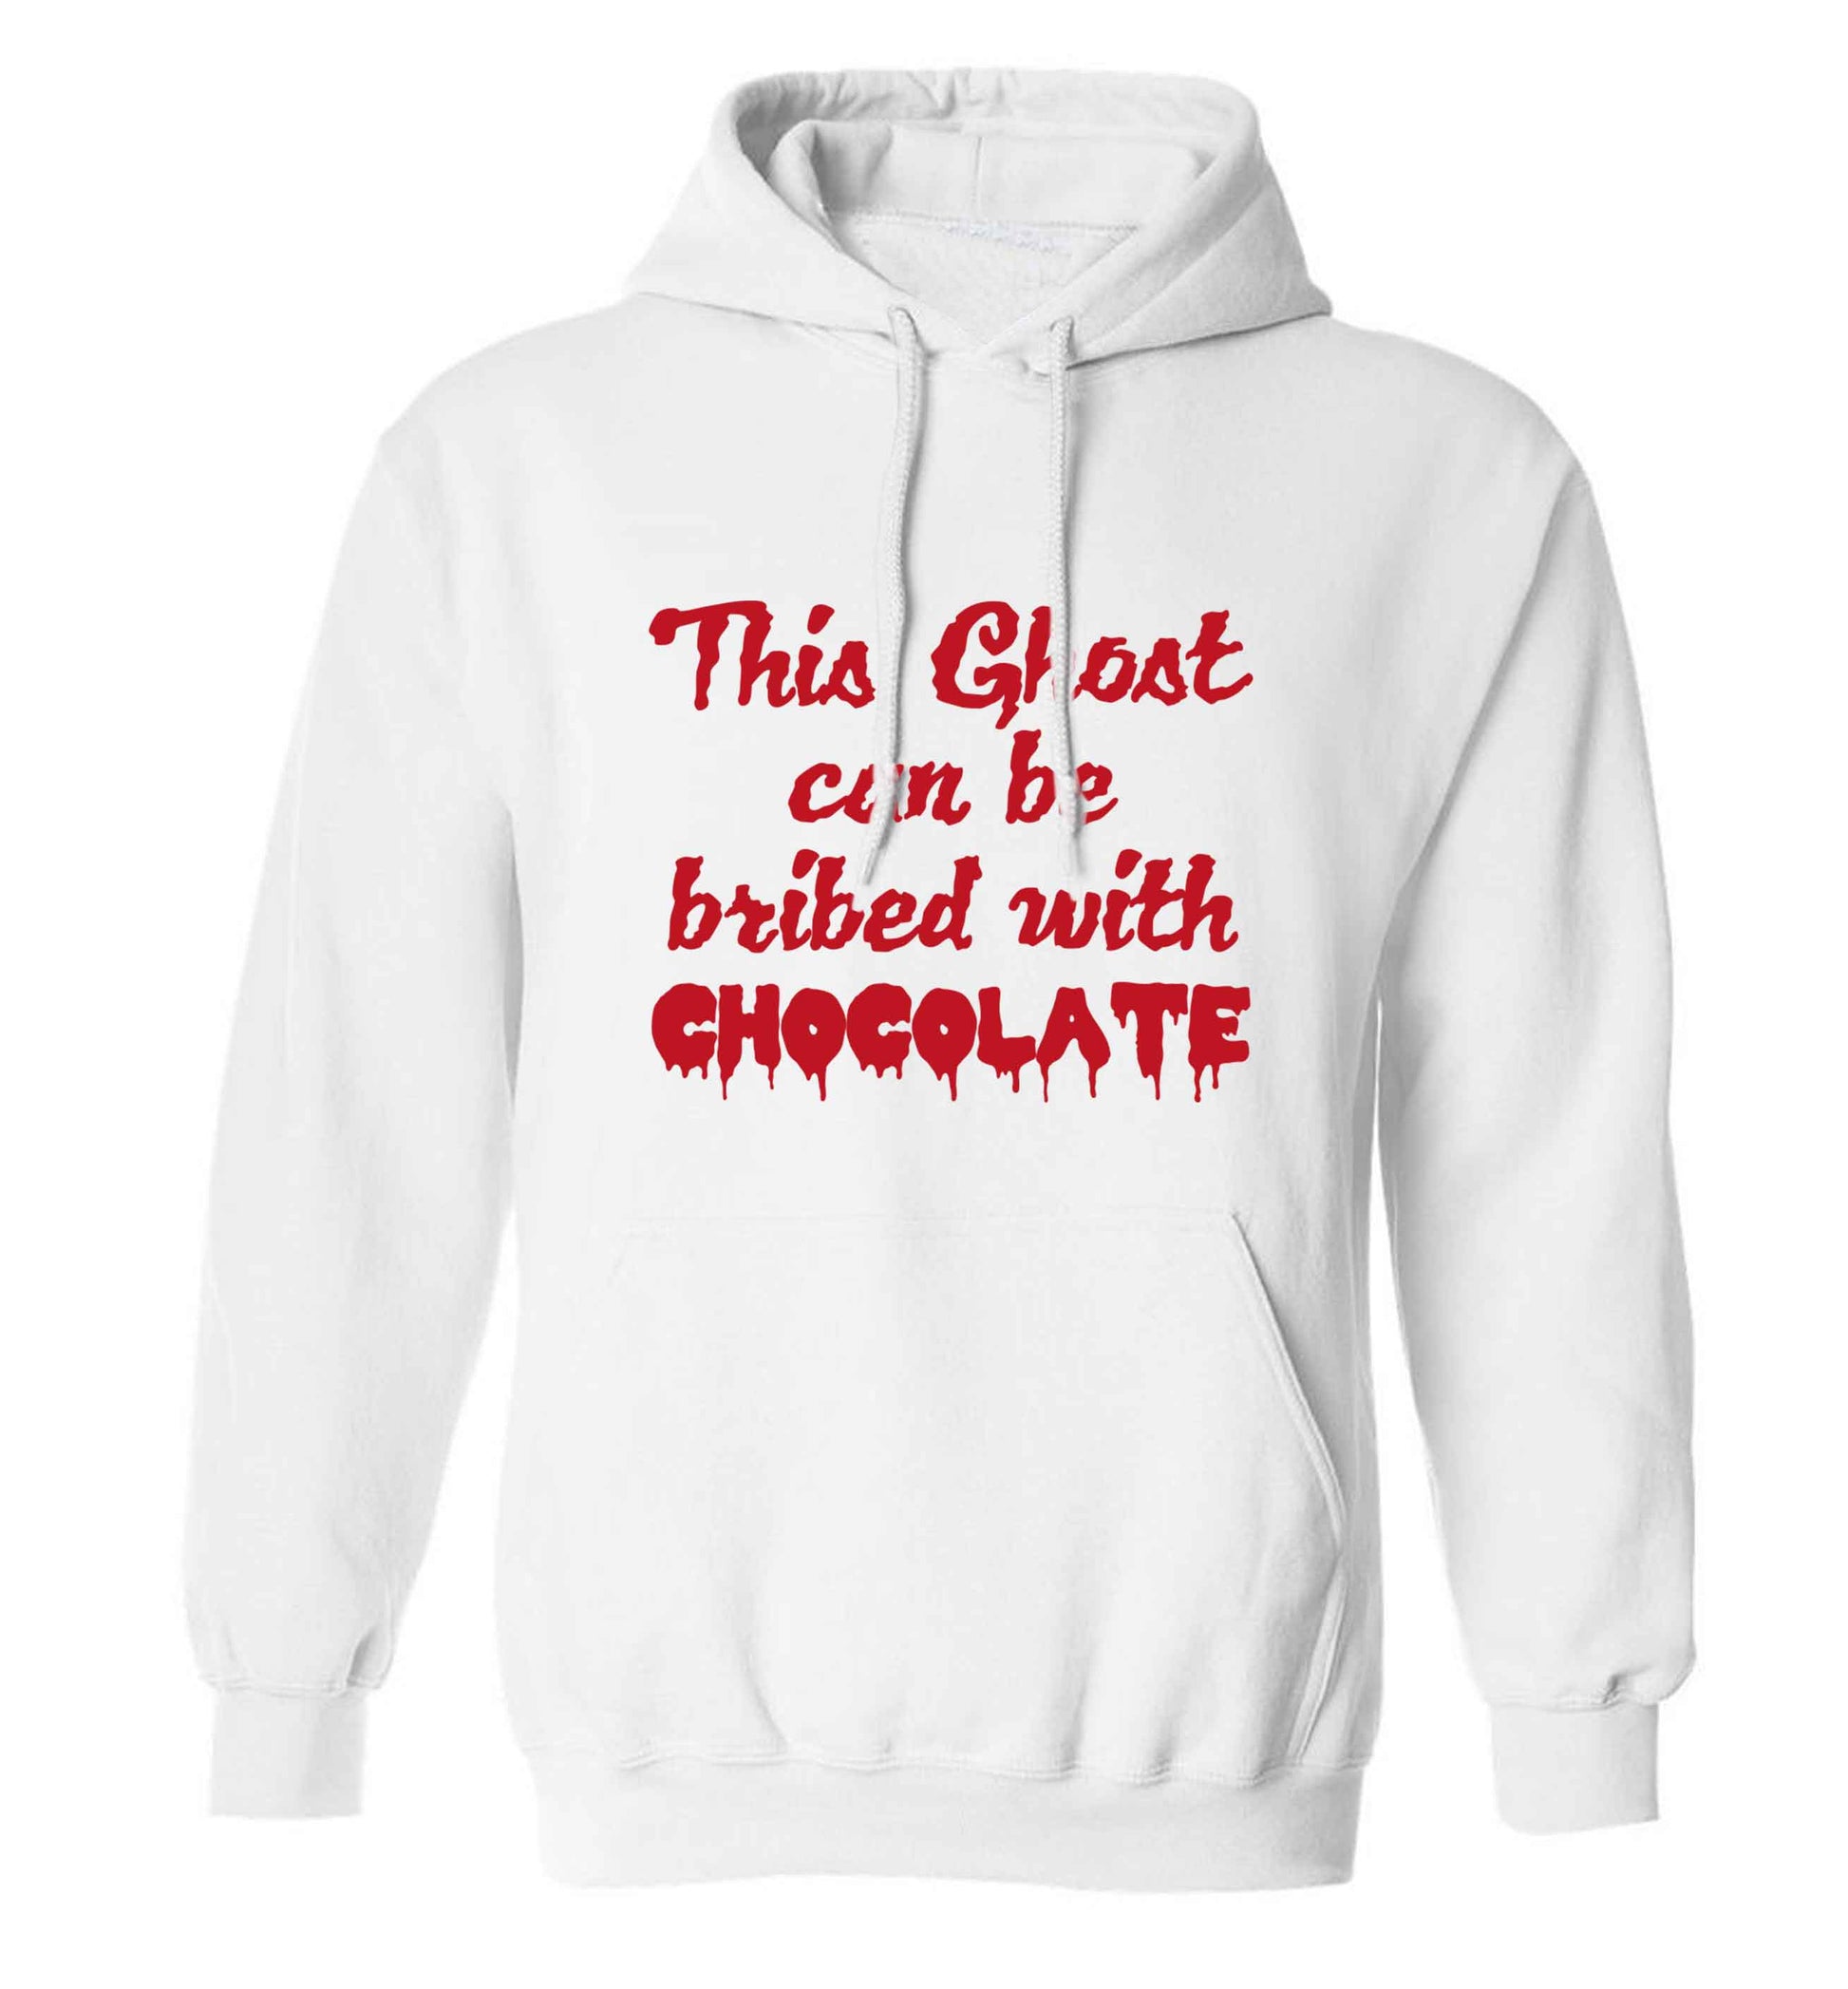 This ghost can be bribed with chocolate adults unisex white hoodie 2XL